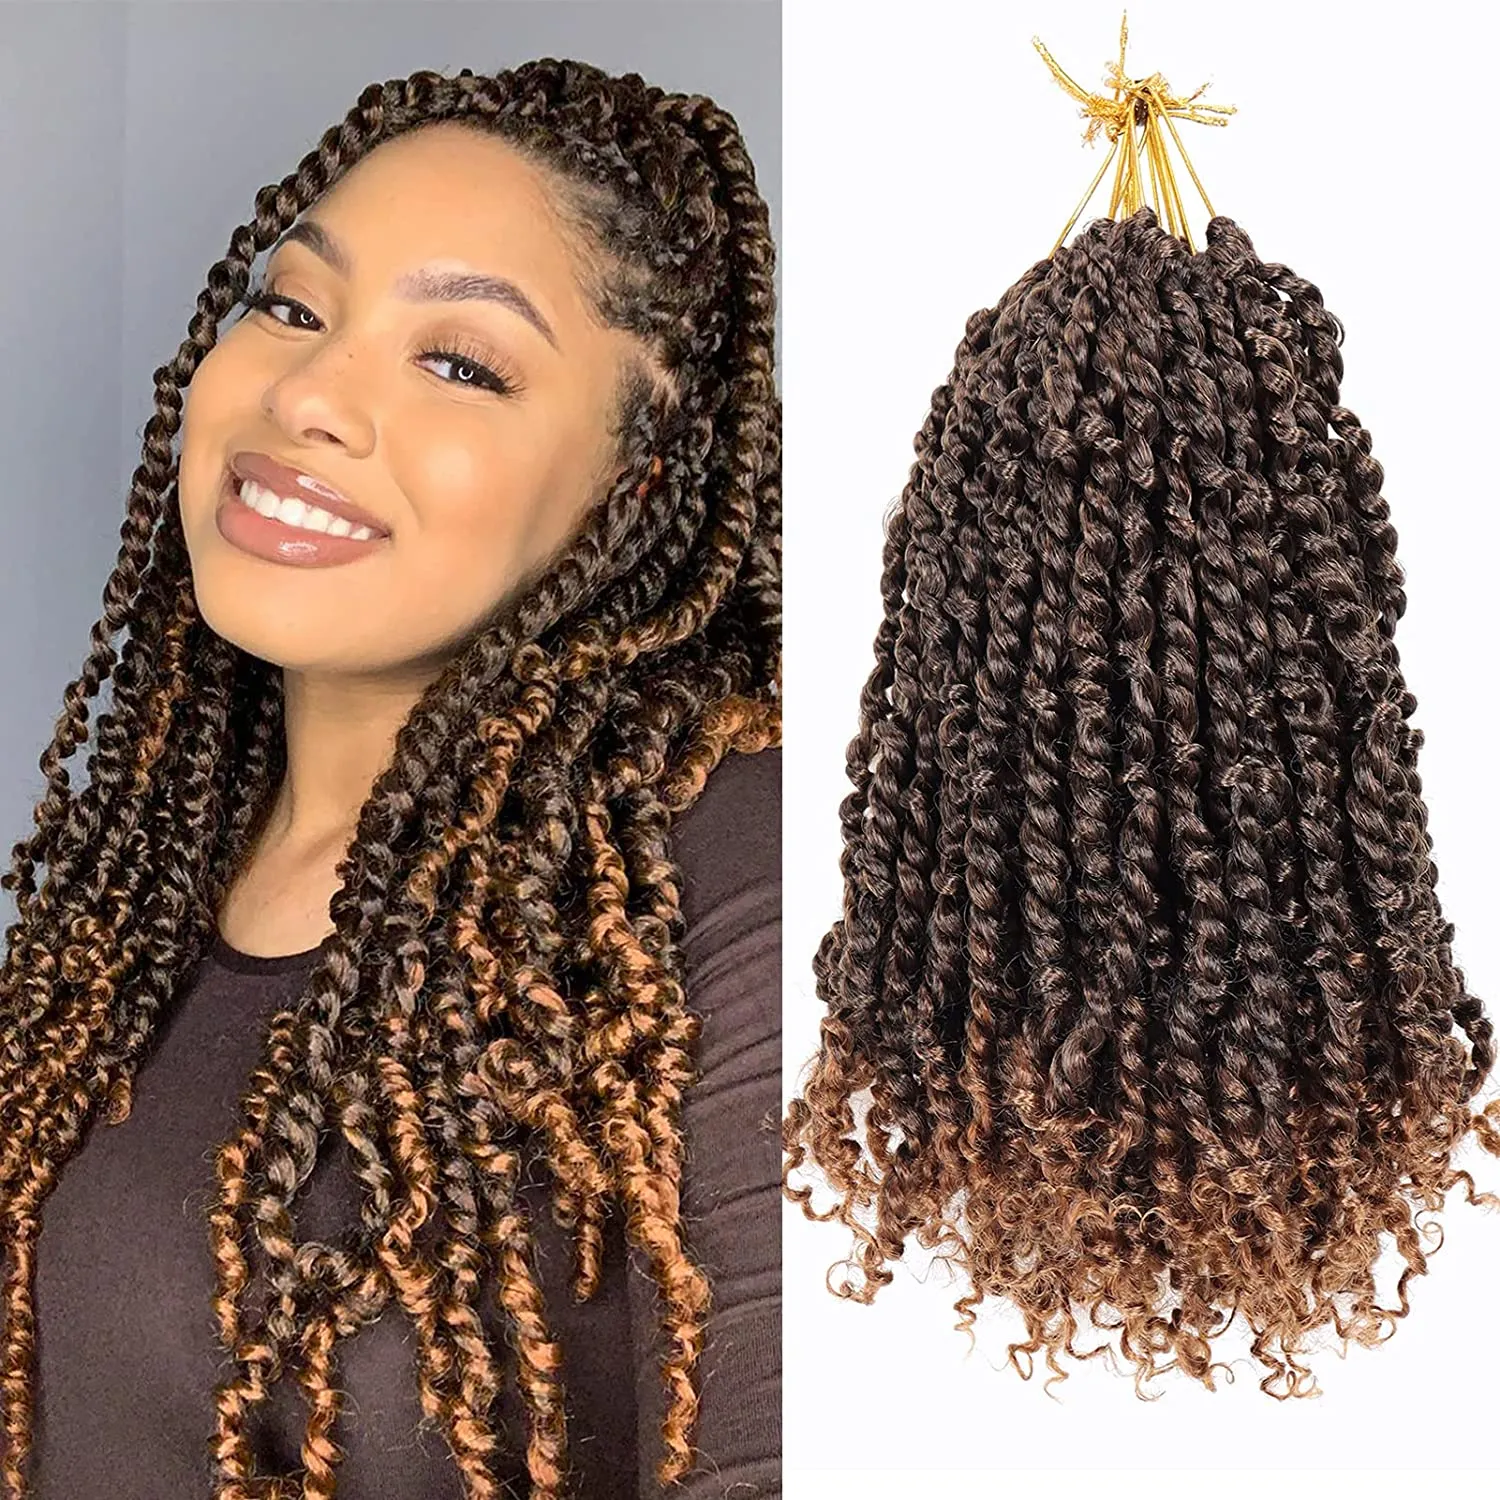 Passion Twist Crochet Hair 14inch Water Wave Hair Synthetic